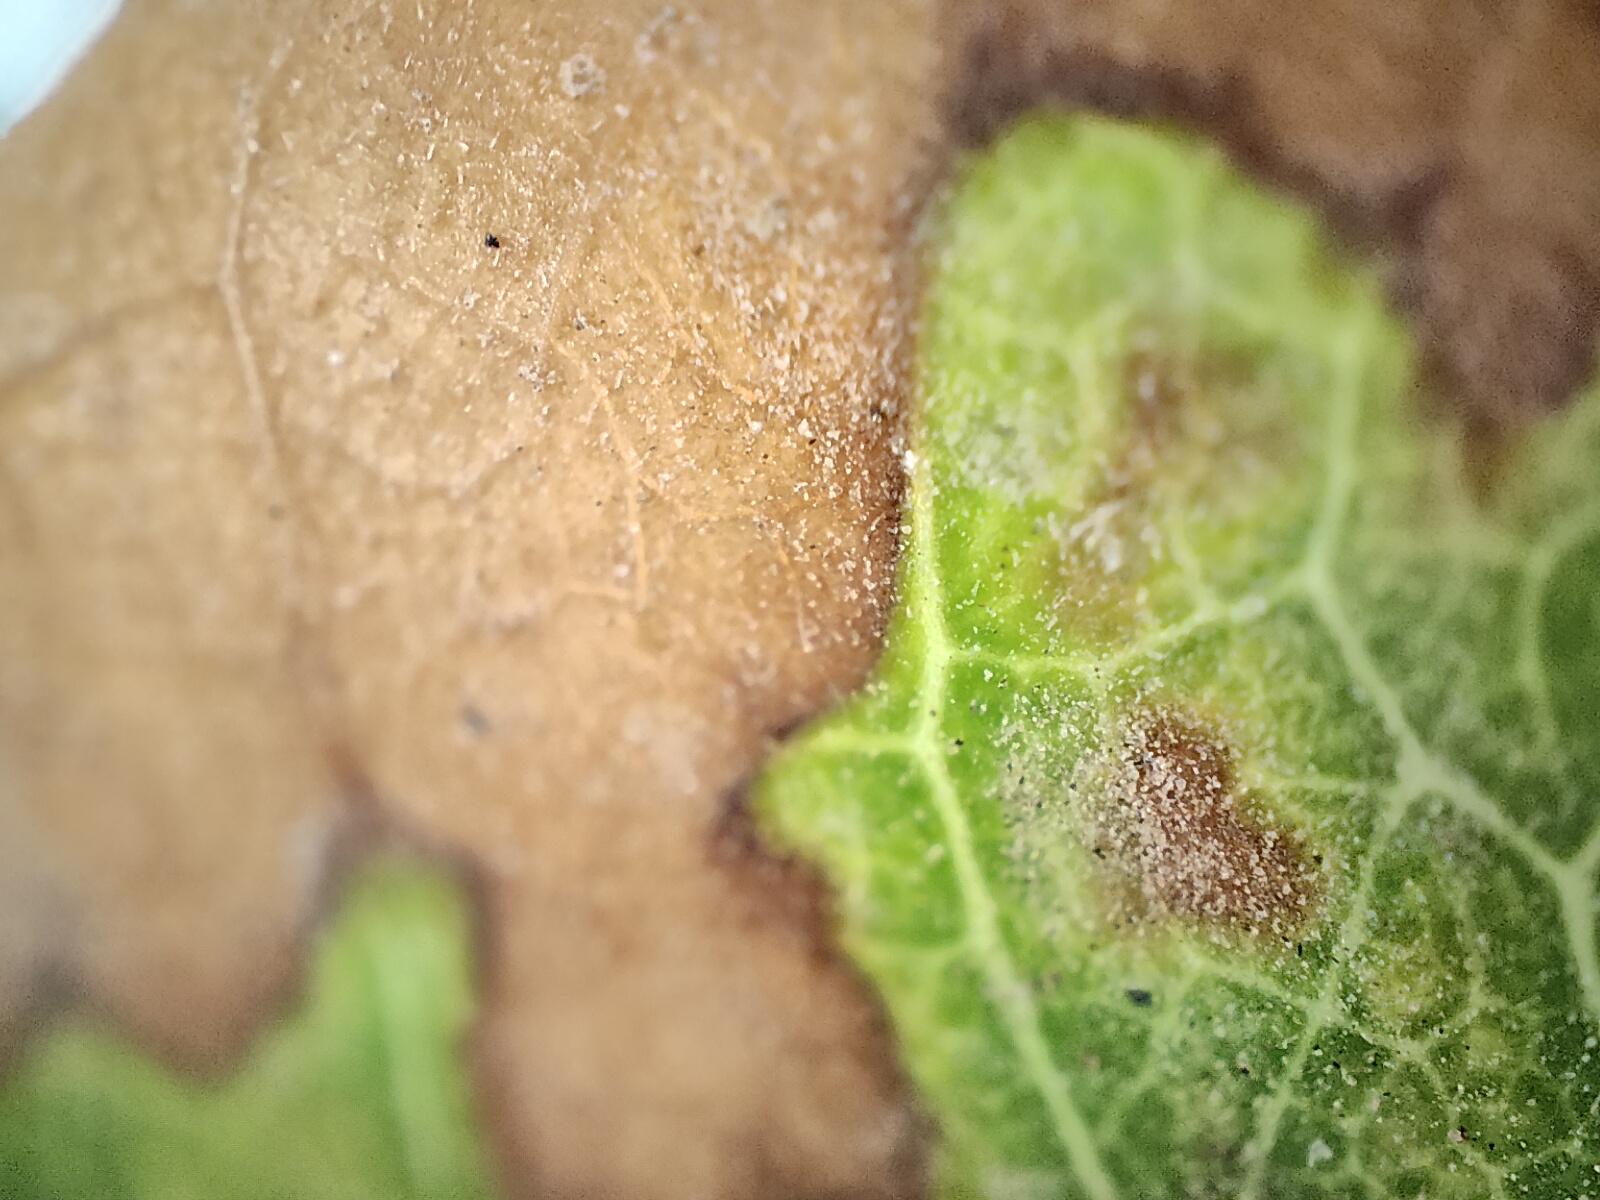 Macro view of ridged of a decaying leaf in brown and green colors photographed with the Realme GT 2 Pro's microscope camera.